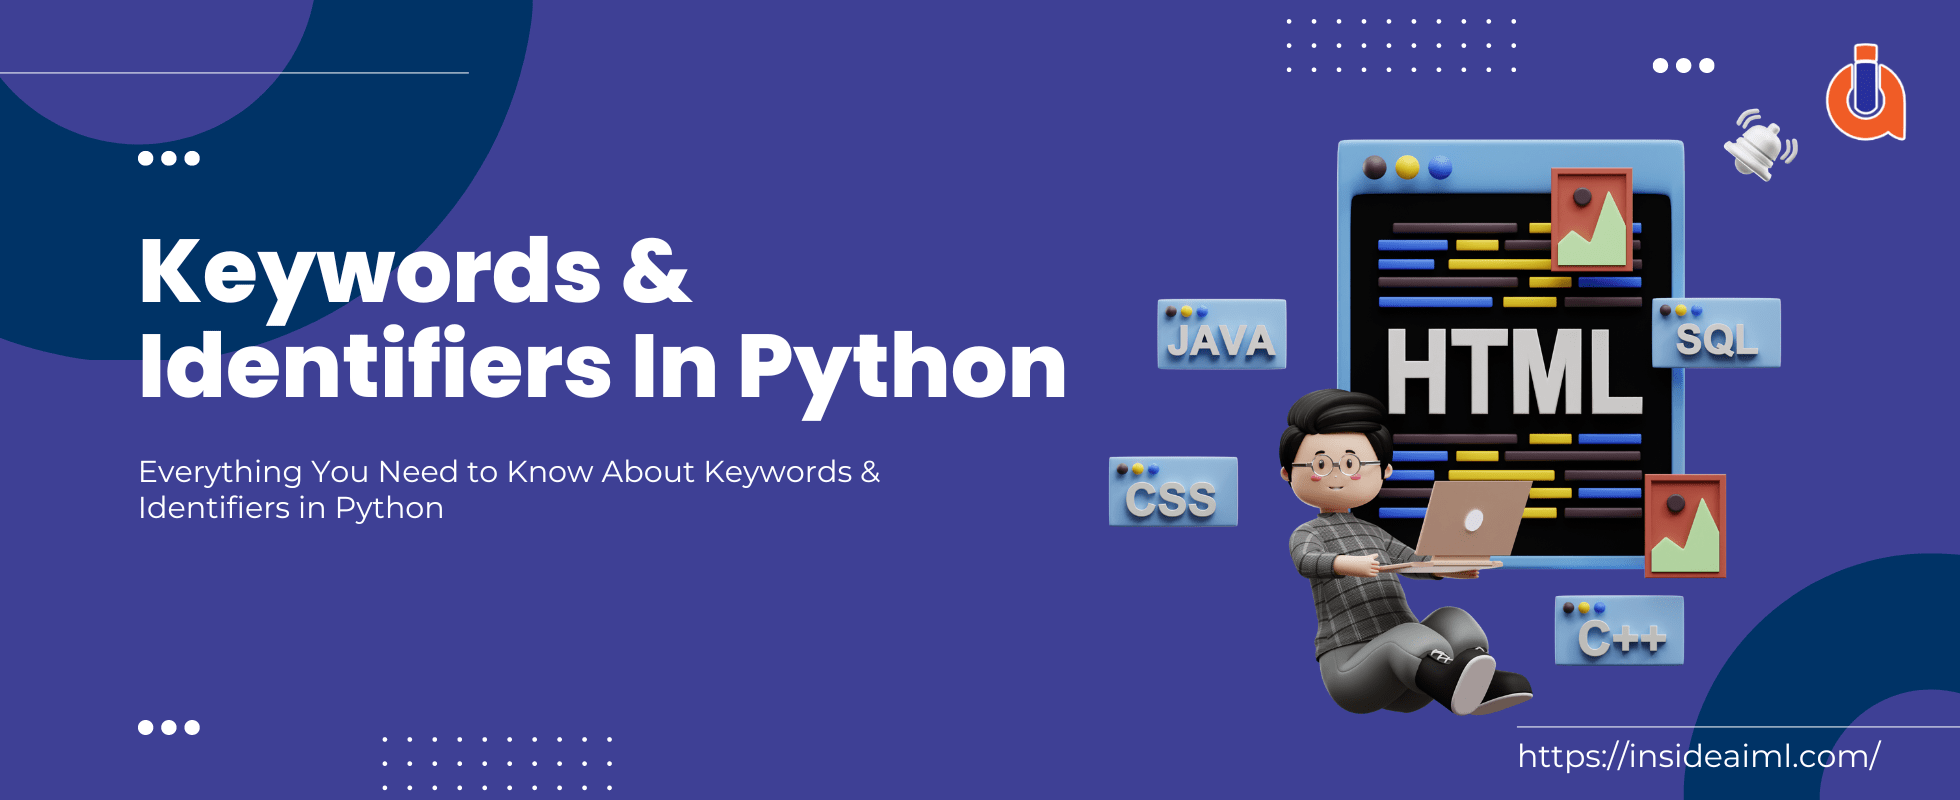 Keywords and Identifiers in Python Blog Thumbnail